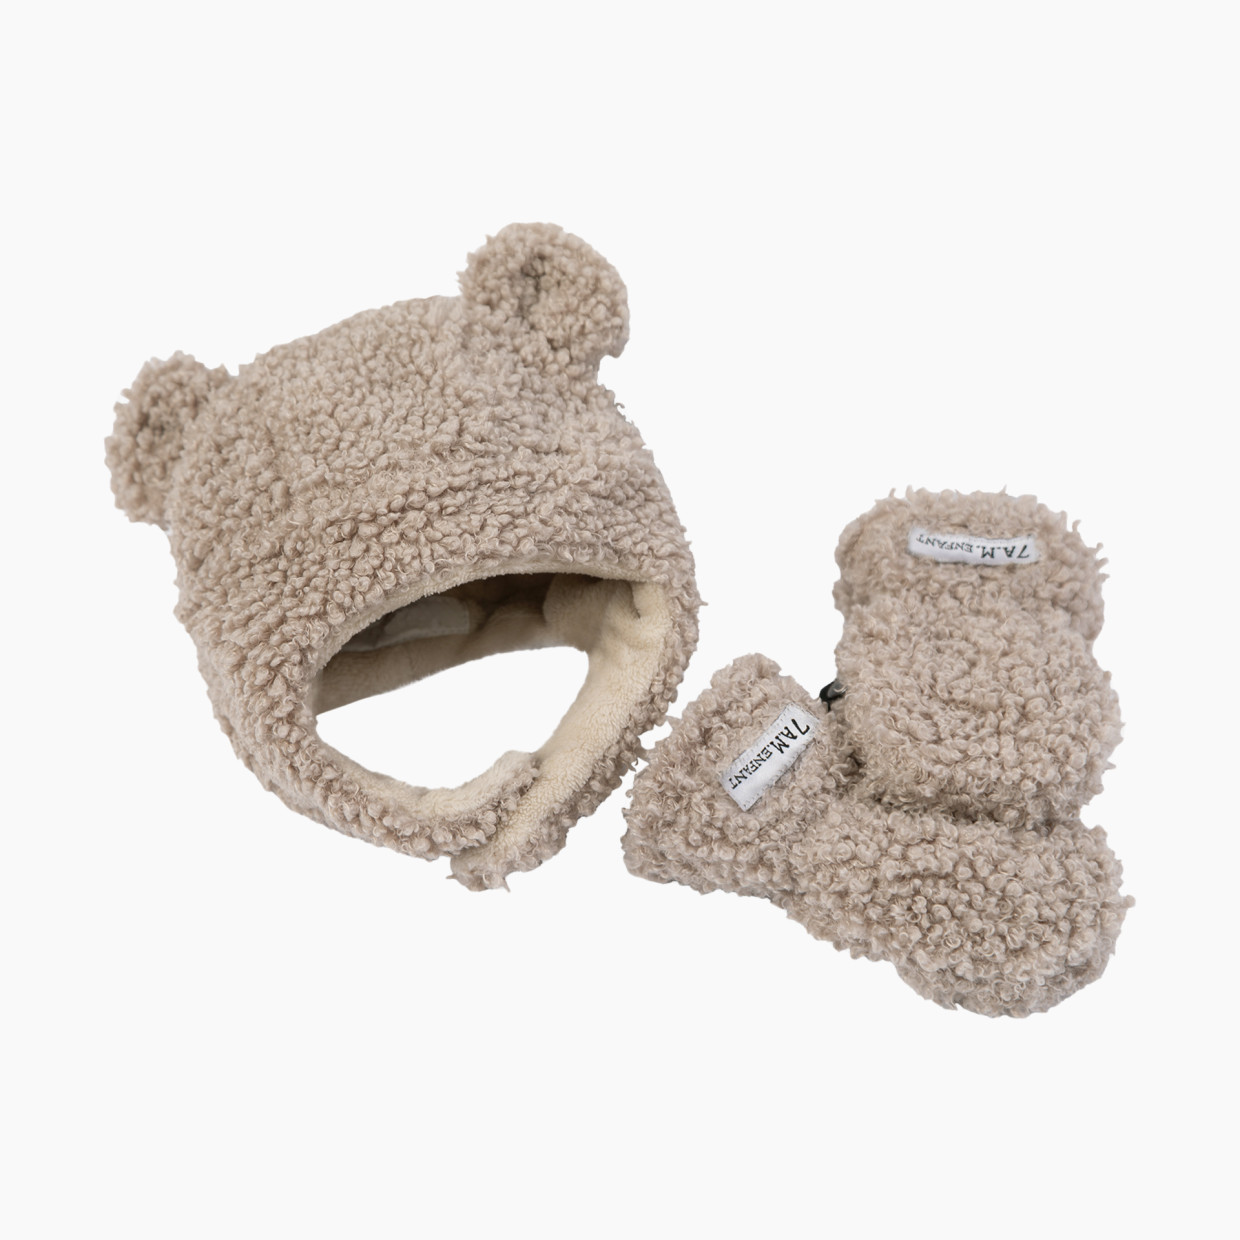 7AM Enfant Teddy Hat and Mittens Set - Oatmeal, 0-6 M.